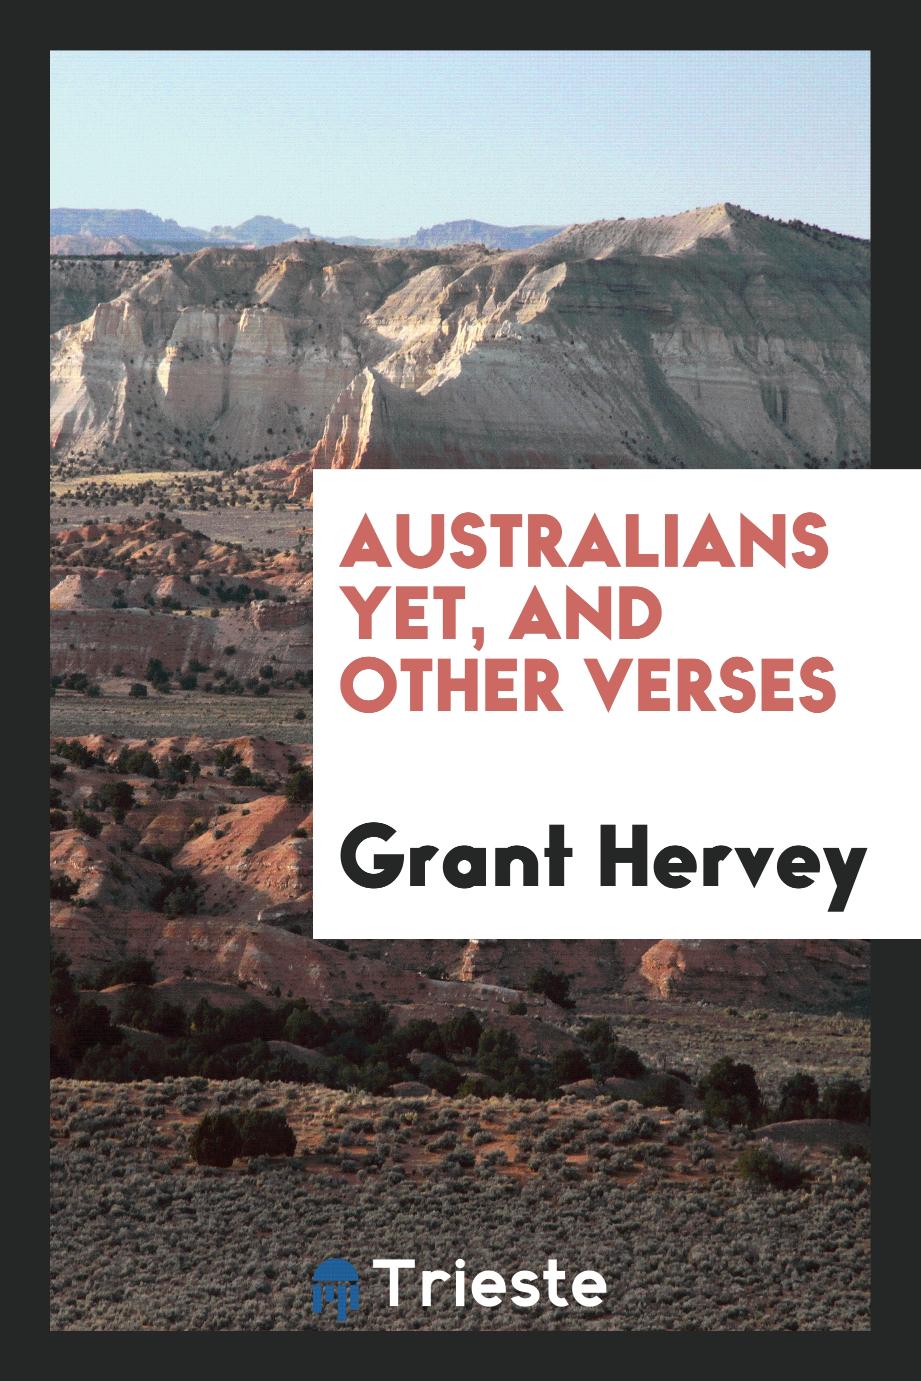 Australians yet, and other verses